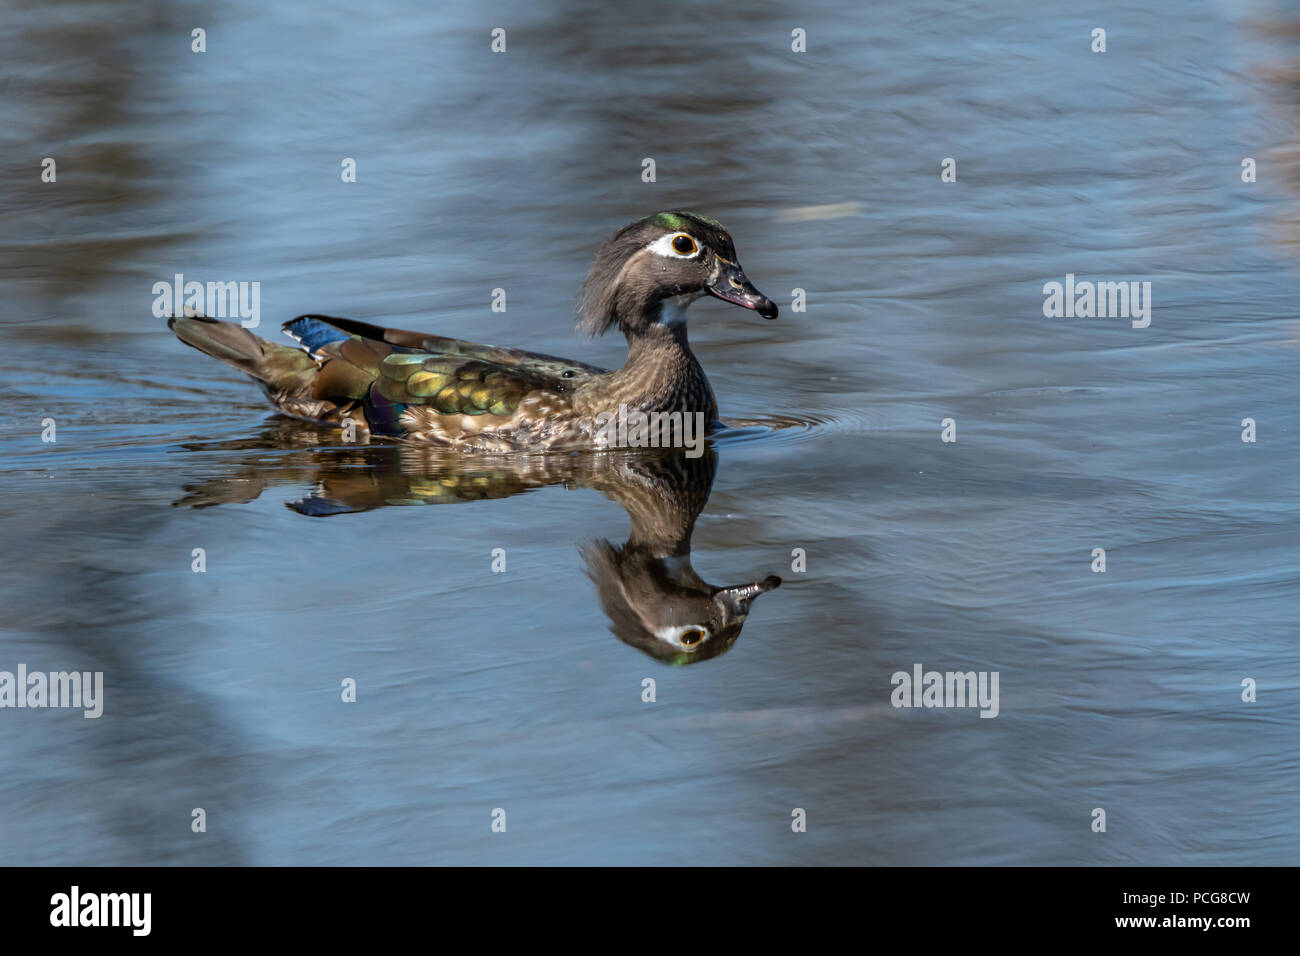 Female wood duck (Aix sponsa) swimming reflected in the water. Stock Photo